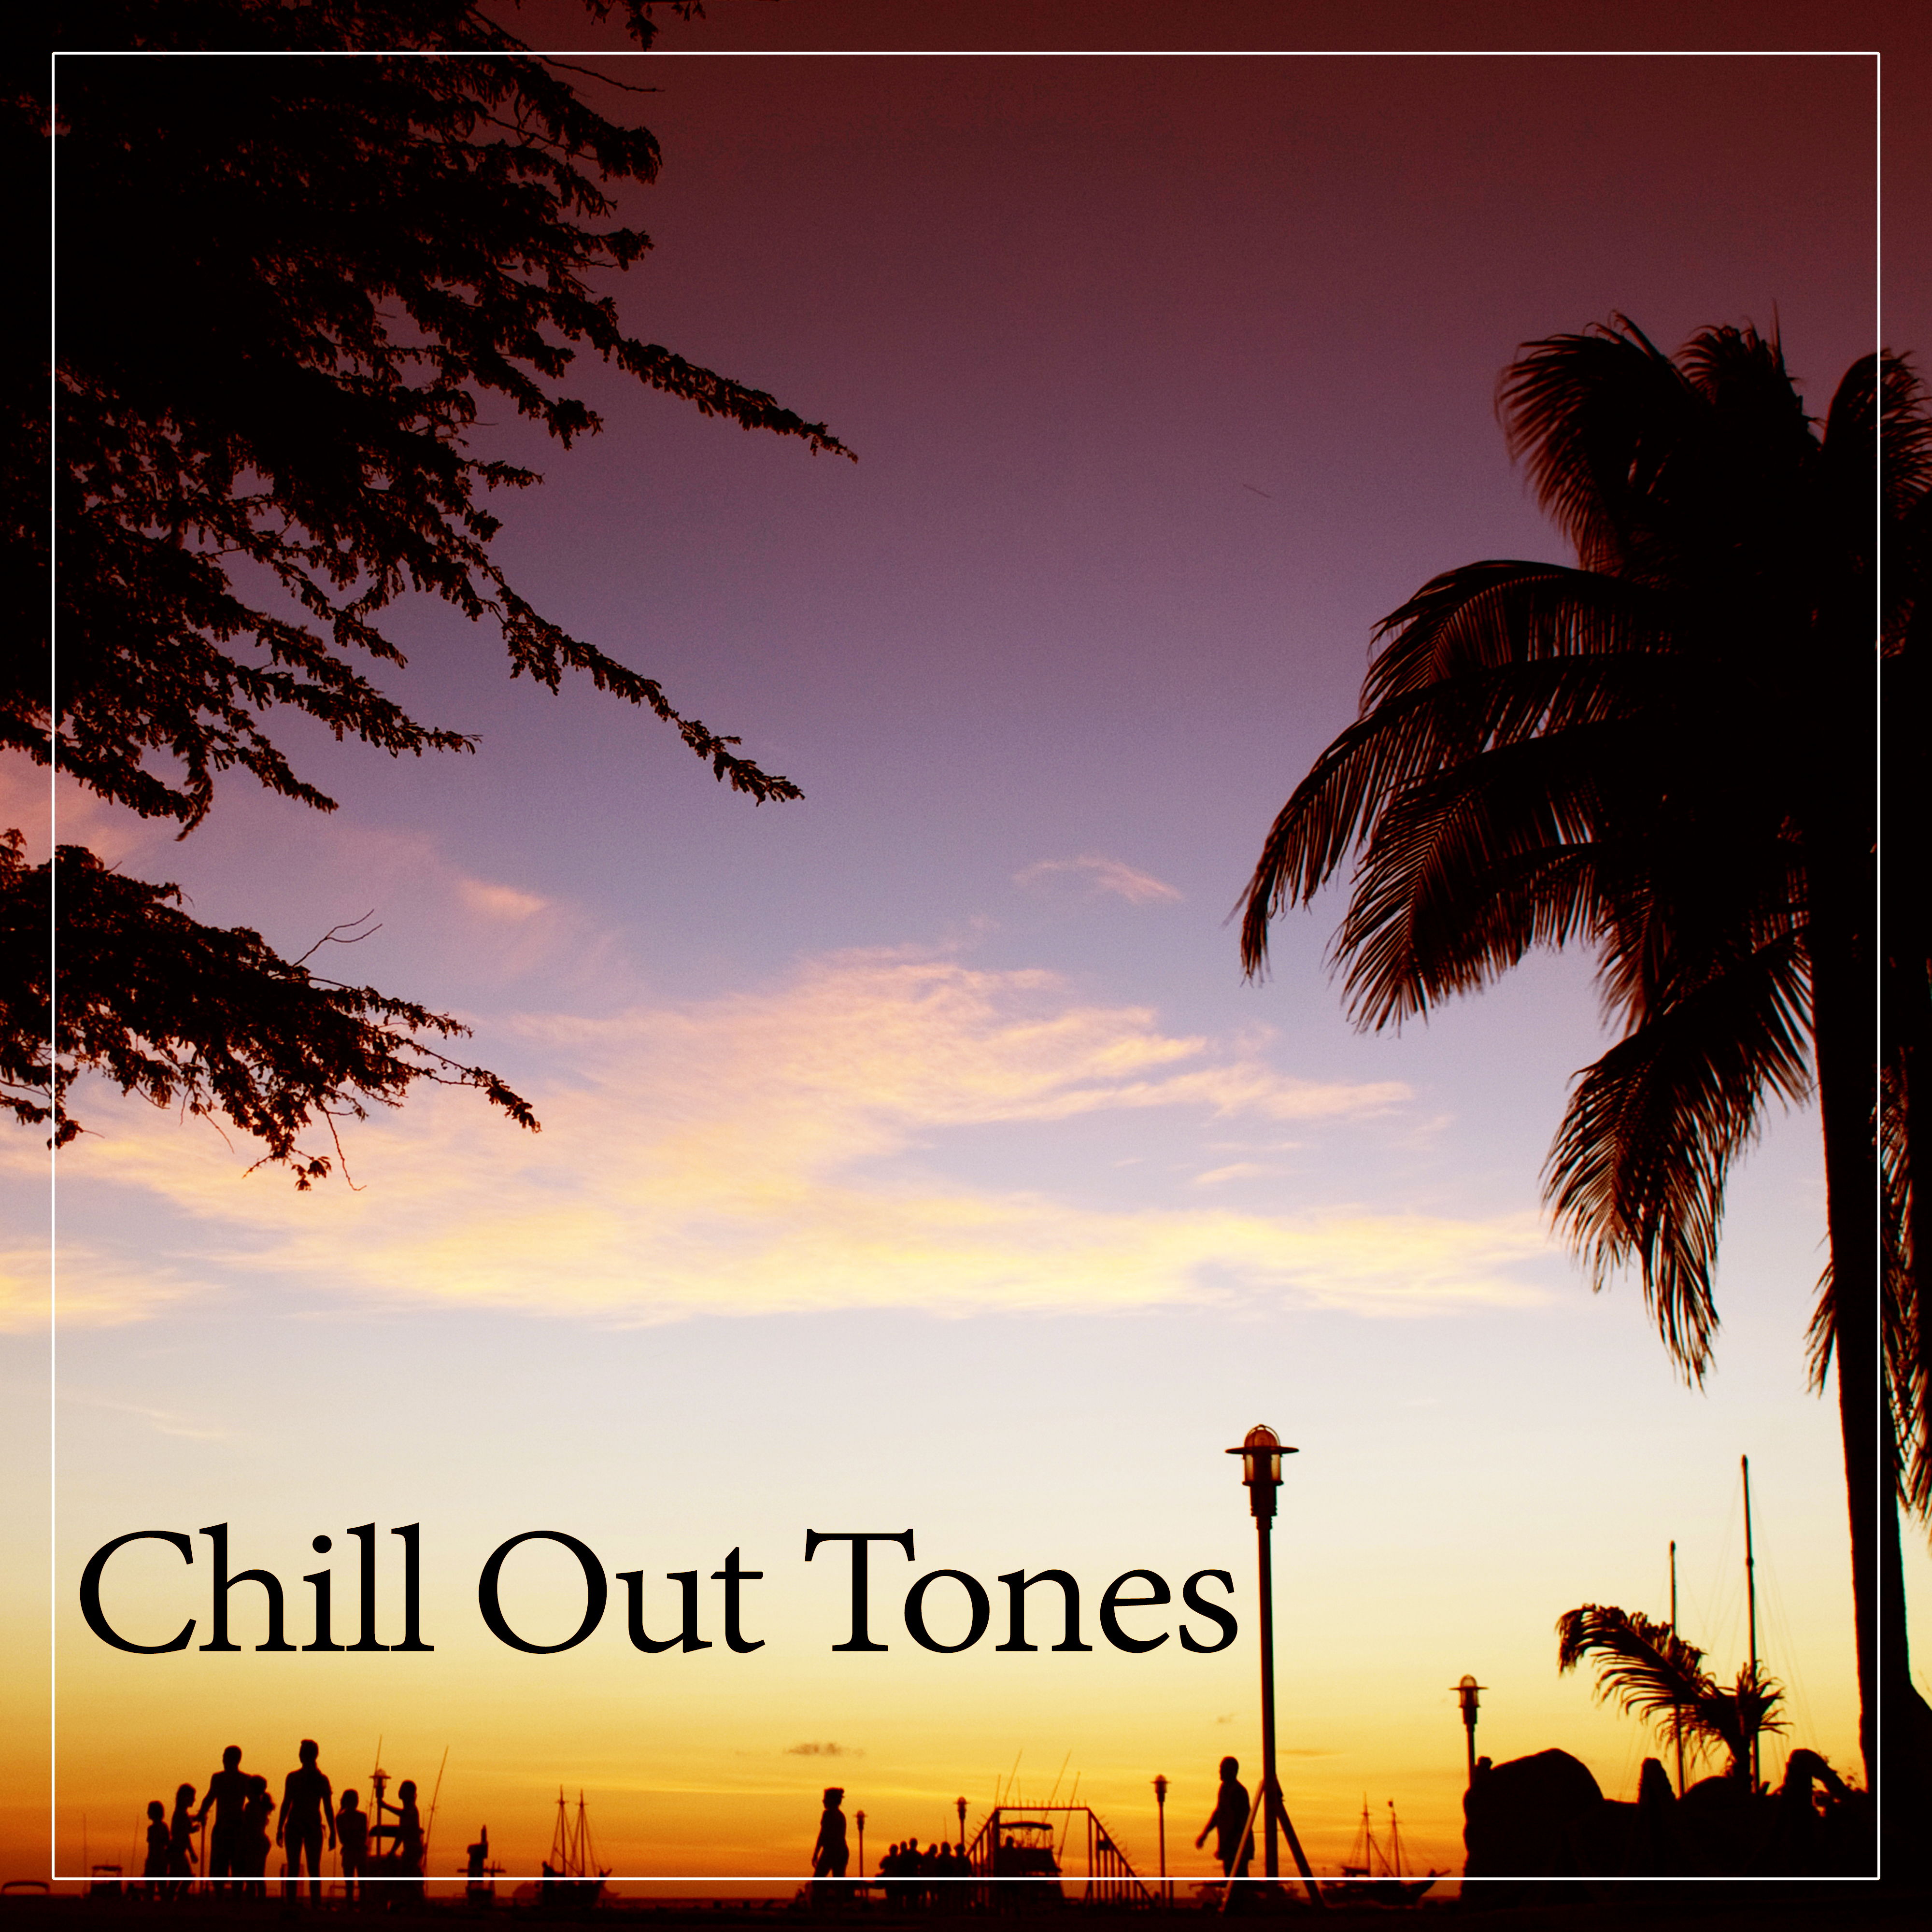 Chill Out Tones  Chill out Music, Summertime